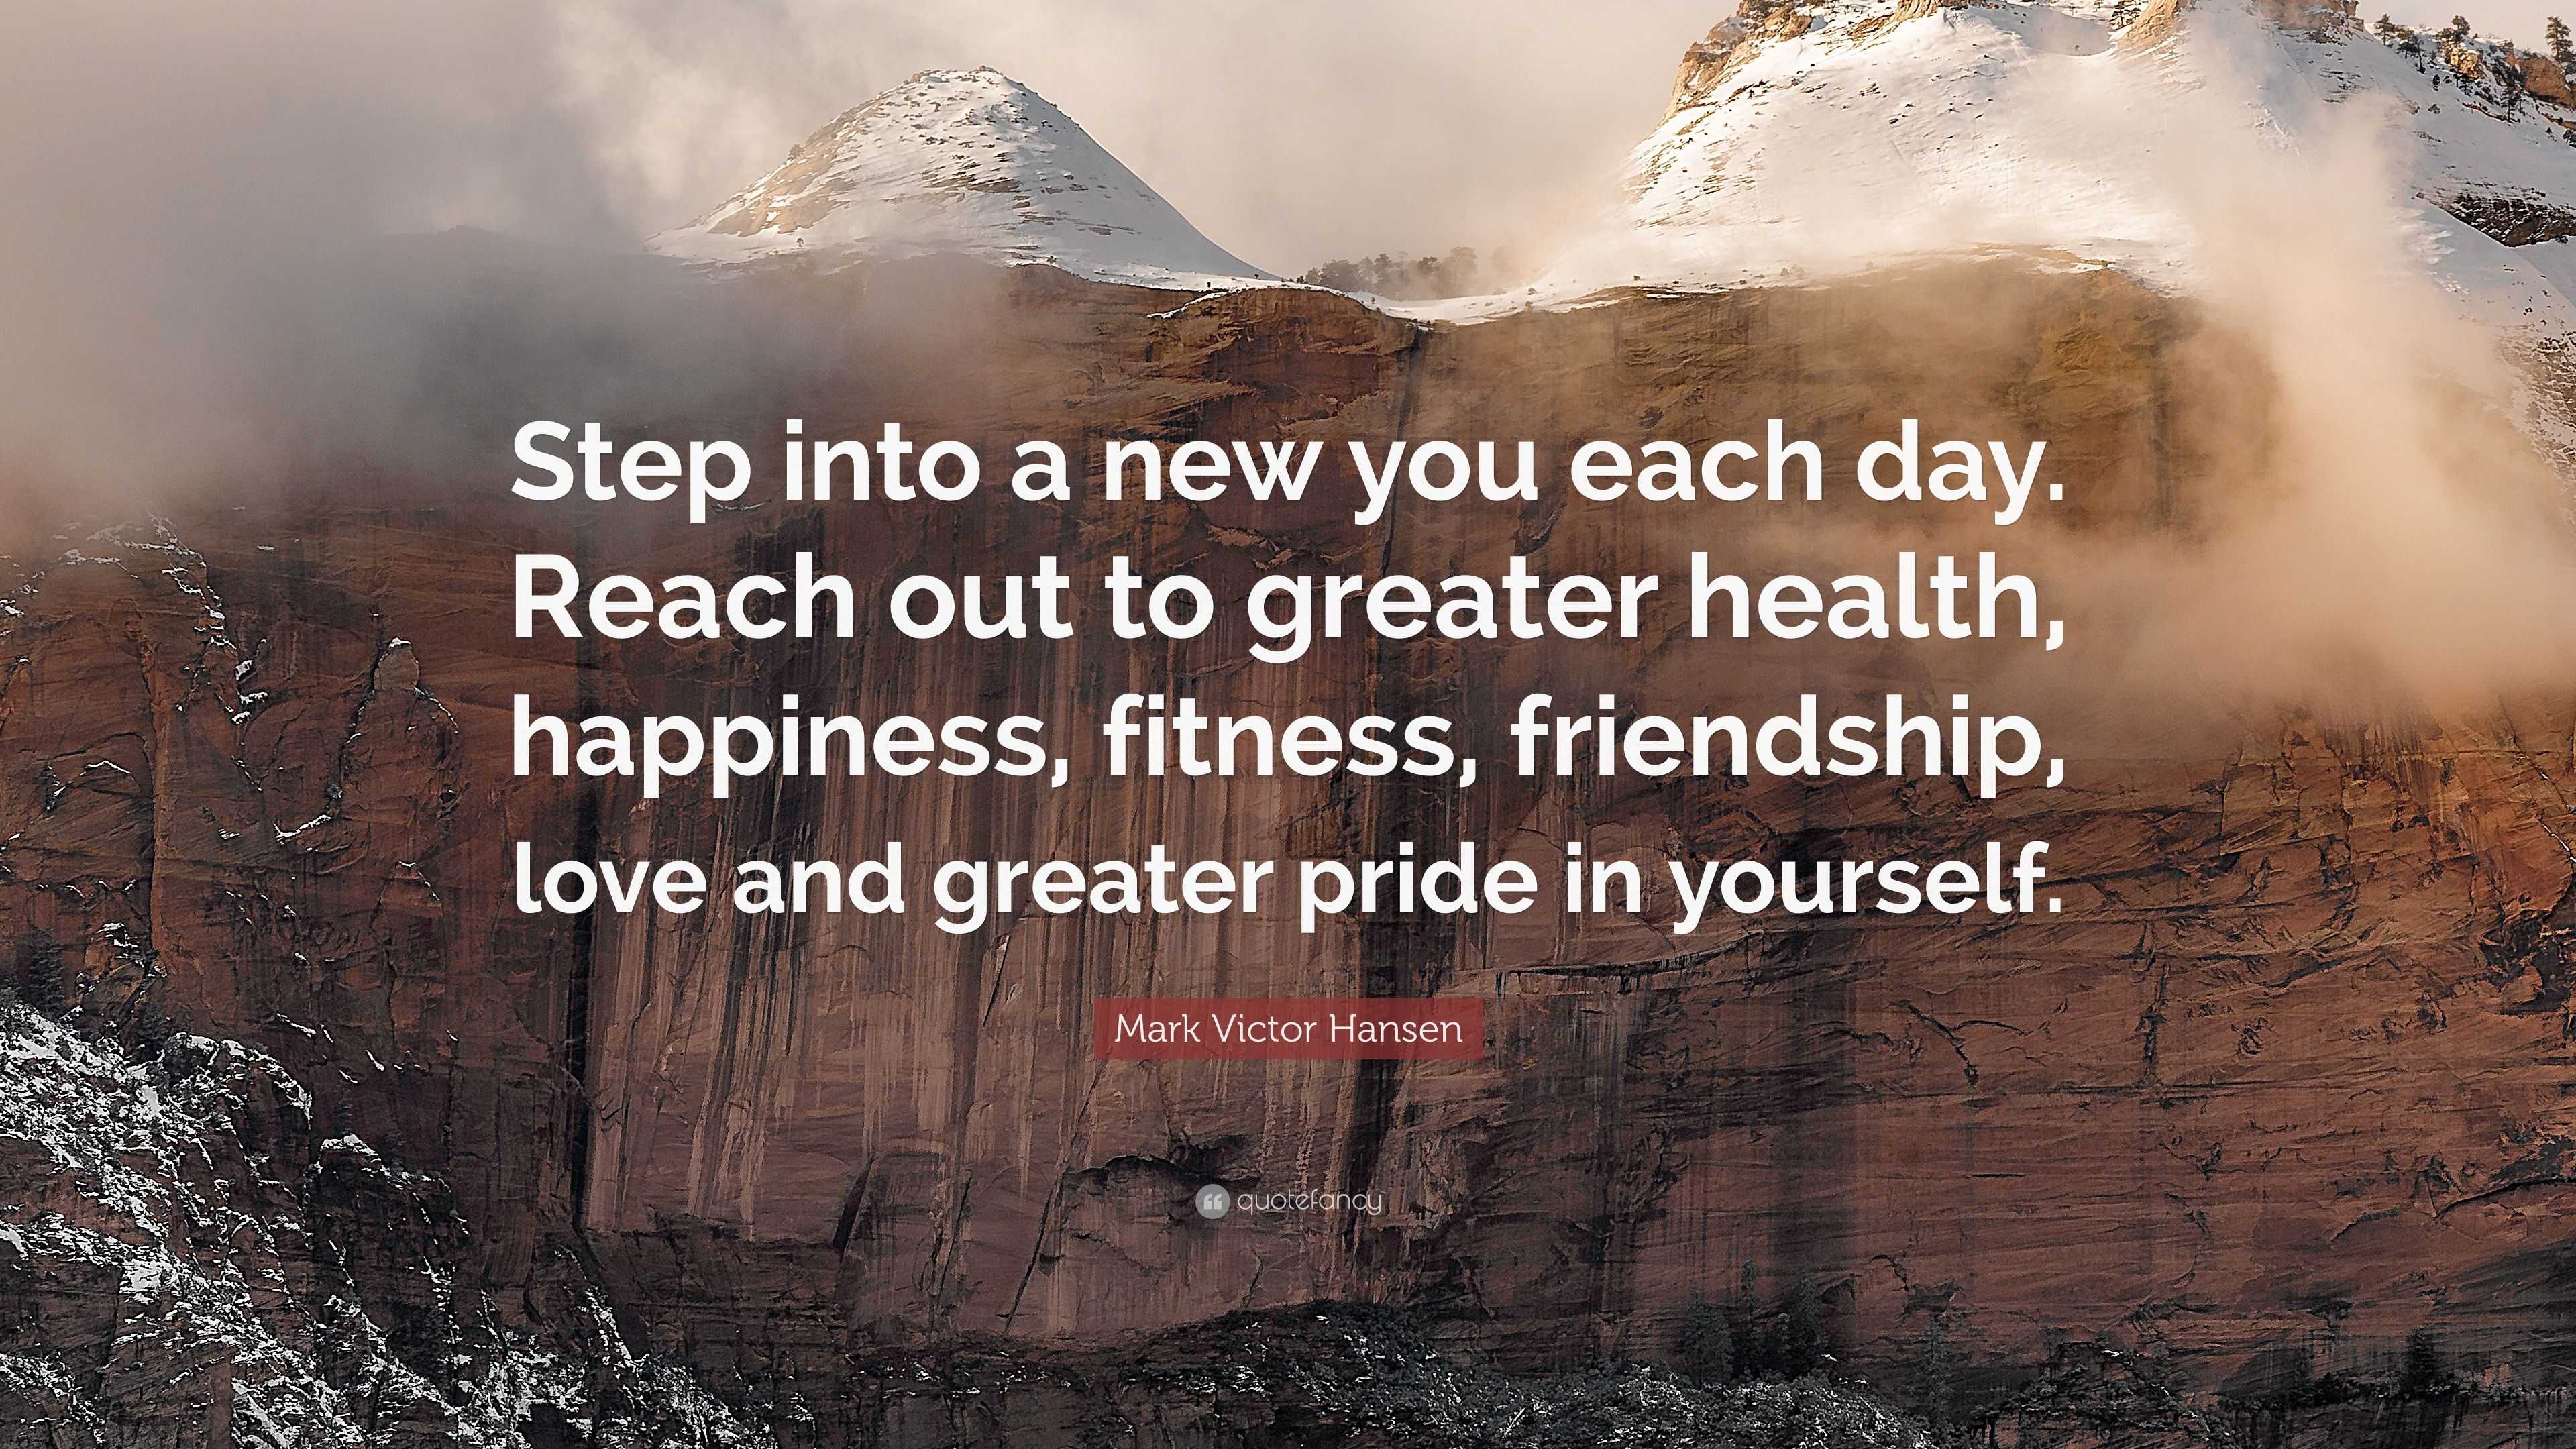 Step into a New Day, a New You, by trying out something new